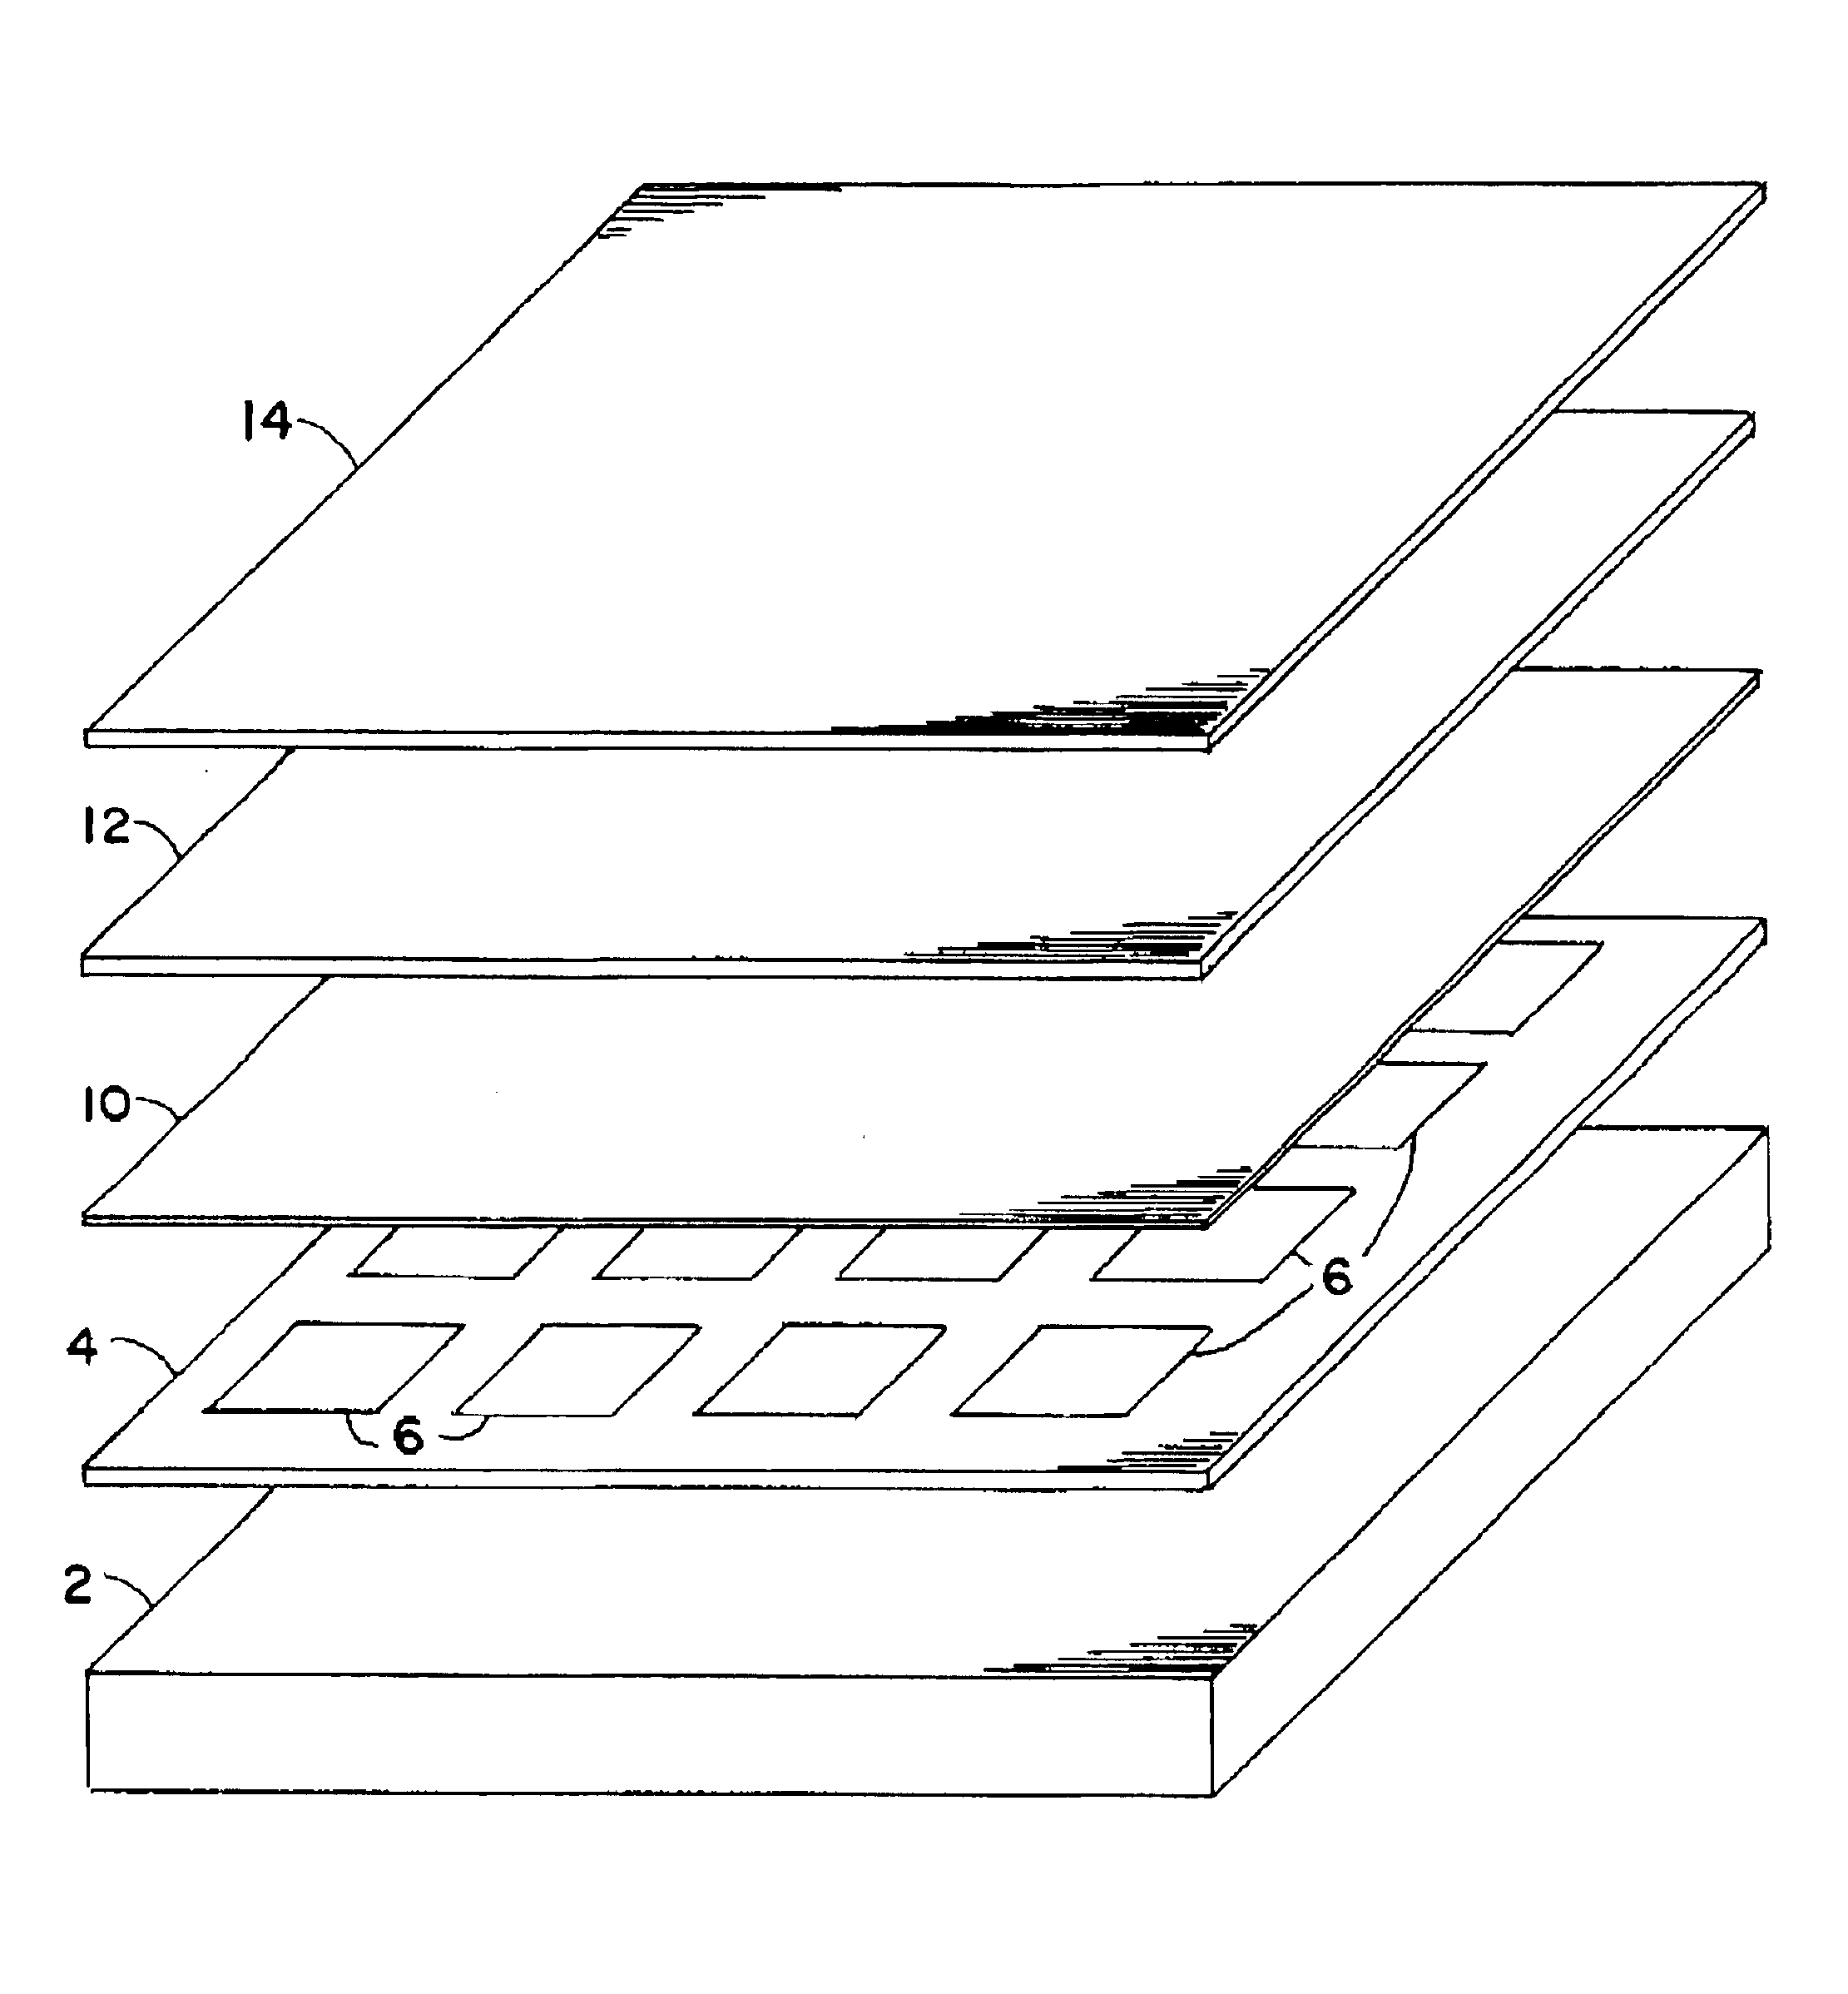 Solar cell modules with improved backskin